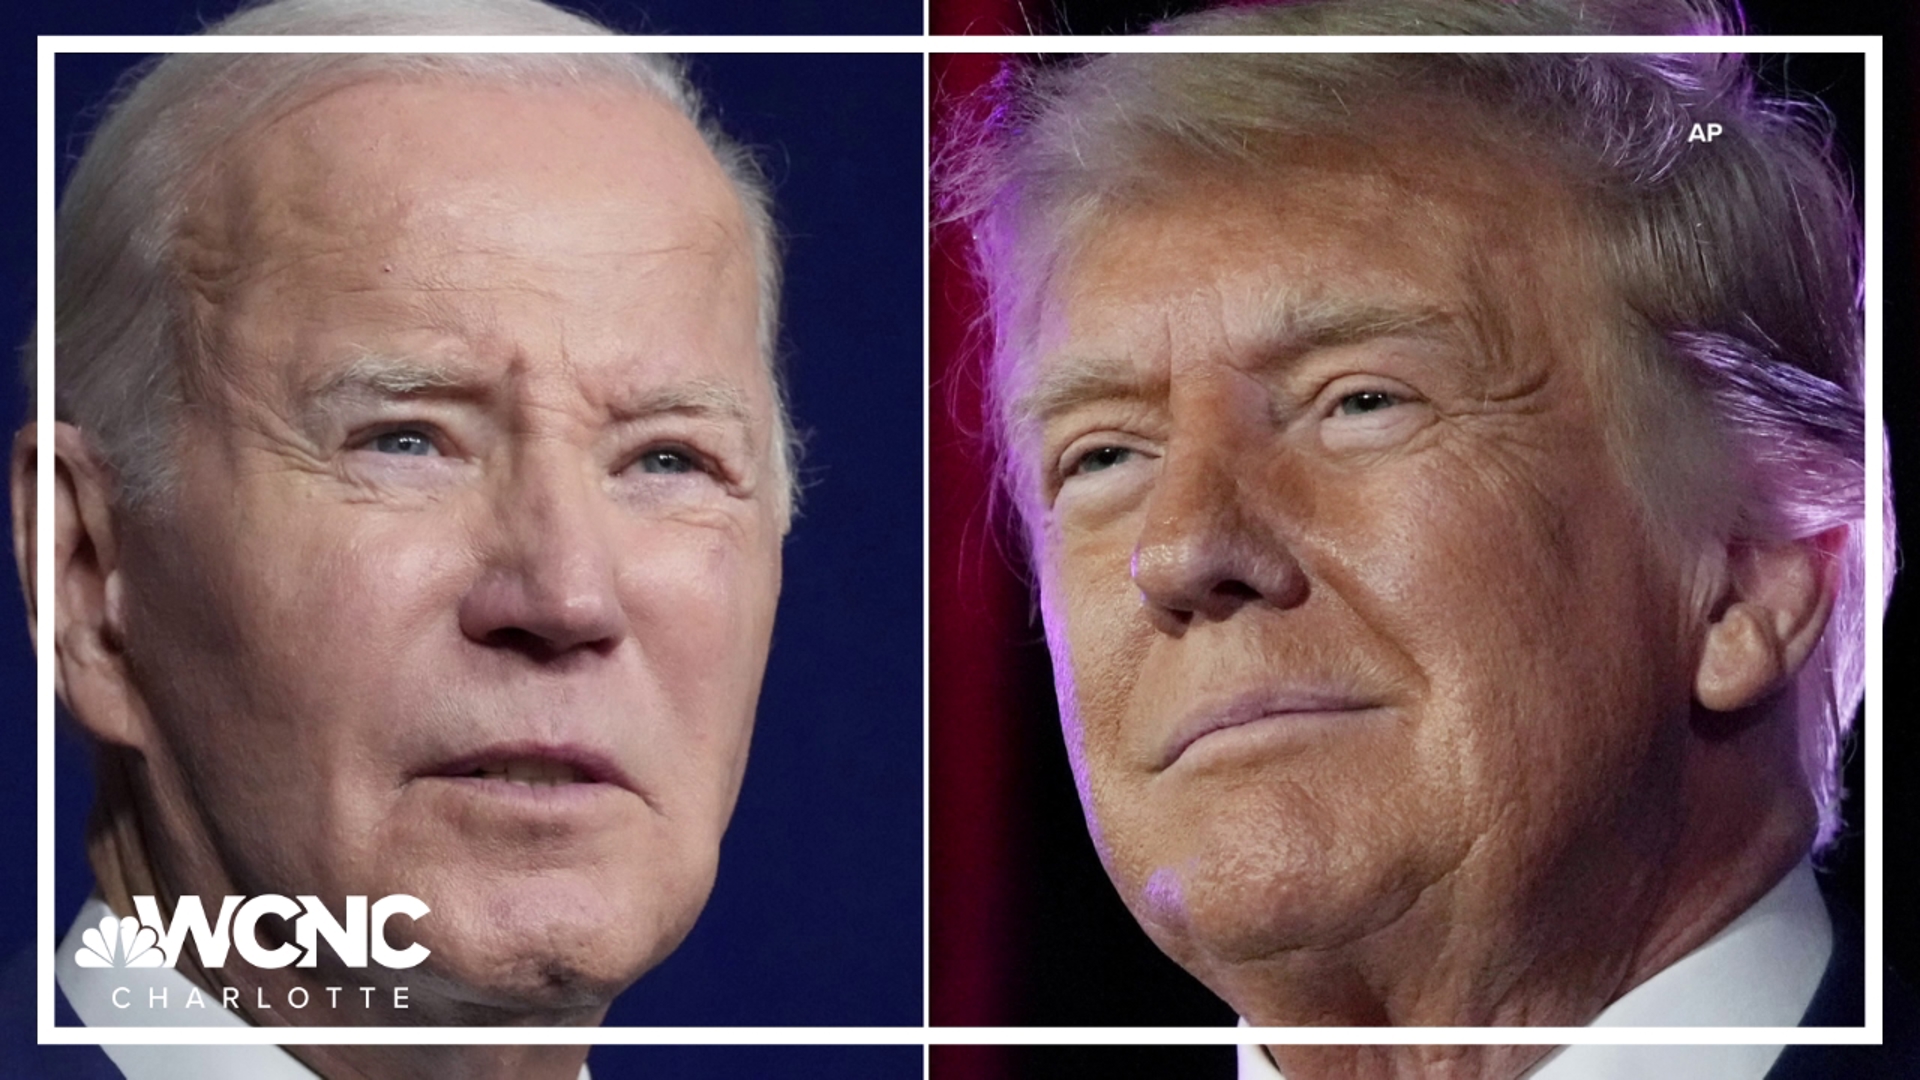 Former President Trump and President Biden are facing off in the first presidential debate of the year. Tonight's debate will look different. Let's connect the dots.